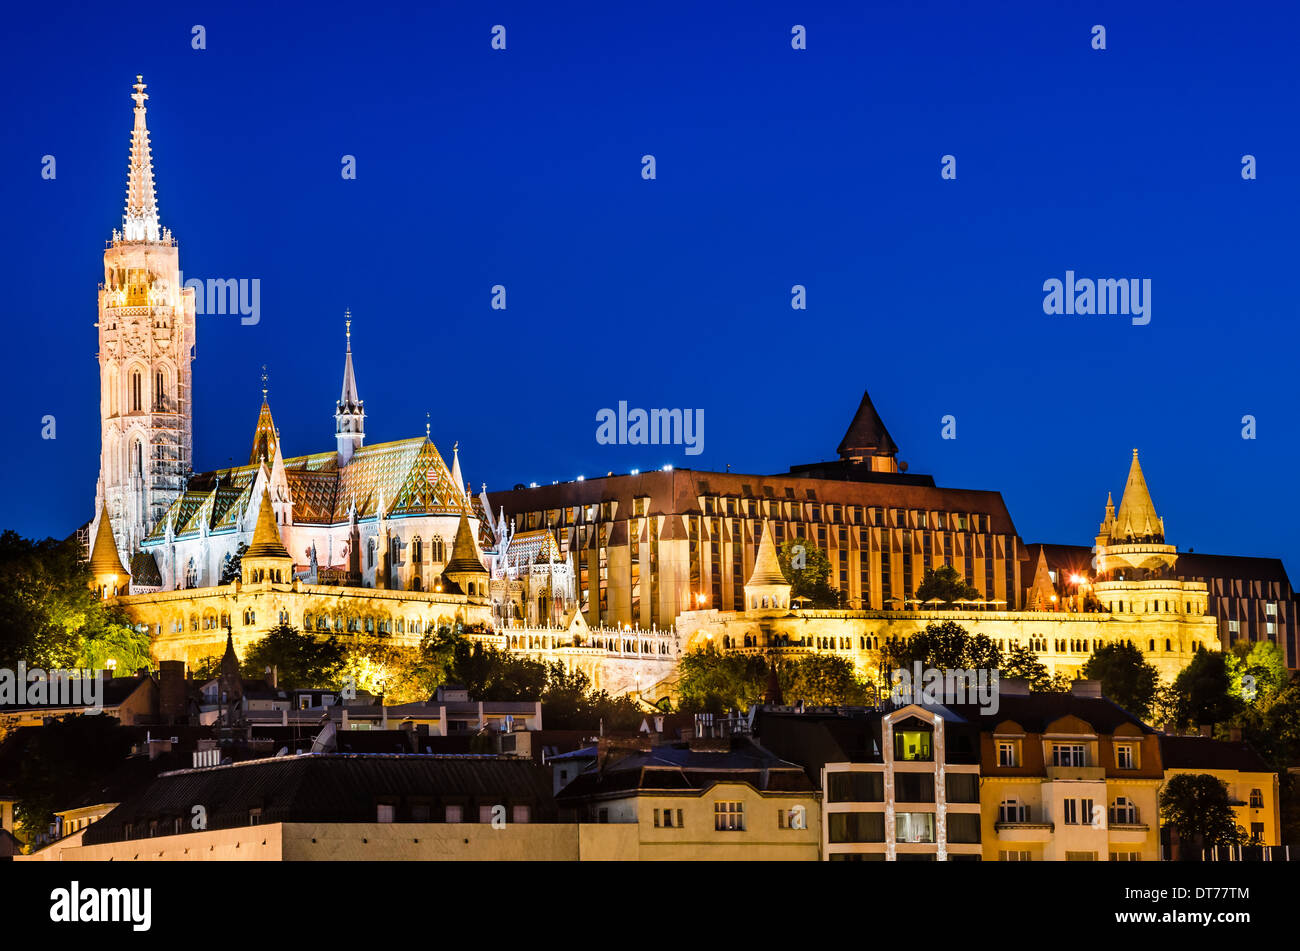 Night view with Danube River, Matthias Church and Fishermen Bastion in Budapest, capital of Hungary. Stock Photo